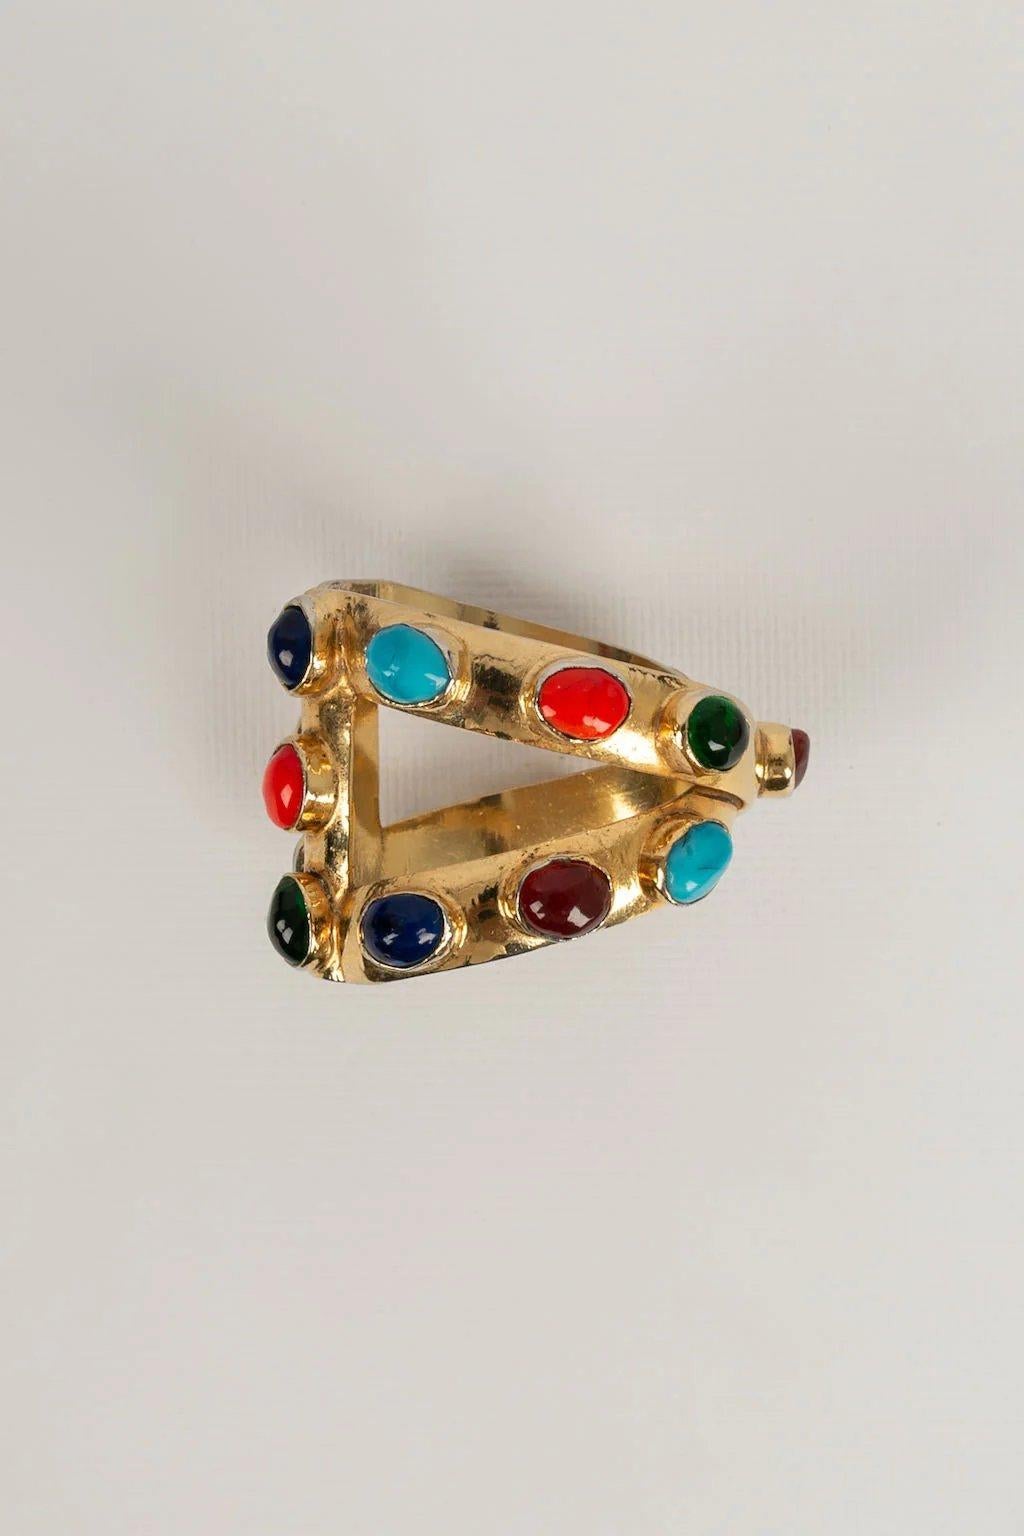 Chanel -(Made in France) Gold-plated metal cuff paved with multicolor cabochons.

Additional information:
Dimensions: Circumference: 15 cm 
Opening: 2.5 cm 
Height: 4.5 cm
Condition: Very good condition
Seller Ref number: BRAB40